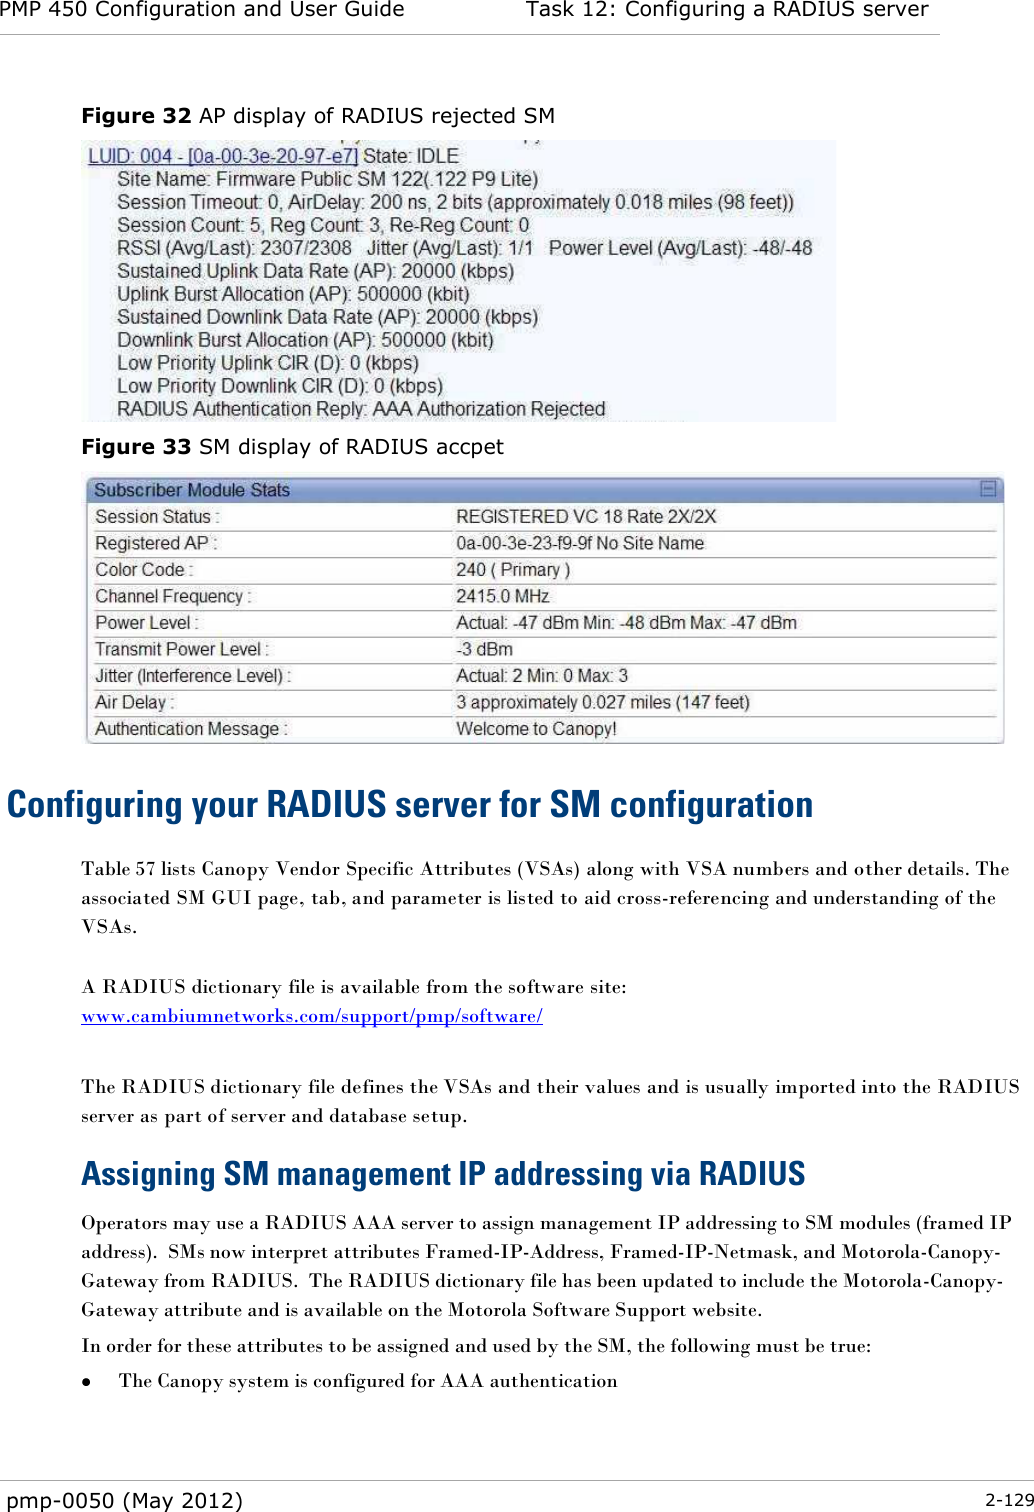 PMP 450 Configuration and User Guide Task 12: Configuring a RADIUS server  pmp-0050 (May 2012)  2-129  Figure 32 AP display of RADIUS rejected SM  Figure 33 SM display of RADIUS accpet  Configuring your RADIUS server for SM configuration Table 57 lists Canopy Vendor Specific Attributes (VSAs) along with VSA numbers and other details. The associated SM GUI page, tab, and parameter is listed to aid cross-referencing and understanding of the VSAs.  A RADIUS dictionary file is available from the software site: www.cambiumnetworks.com/support/pmp/software/   The RADIUS dictionary file defines the VSAs and their values and is usually imported into the RADIUS server as part of server and database setup. Assigning SM management IP addressing via RADIUS Operators may use a RADIUS AAA server to assign management IP addressing to SM modules (framed IP address).  SMs now interpret attributes Framed-IP-Address, Framed-IP-Netmask, and Motorola-Canopy-Gateway from RADIUS.  The RADIUS dictionary file has been updated to include the Motorola-Canopy-Gateway attribute and is available on the Motorola Software Support website. In order for these attributes to be assigned and used by the SM, the following must be true:  The Canopy system is configured for AAA authentication 